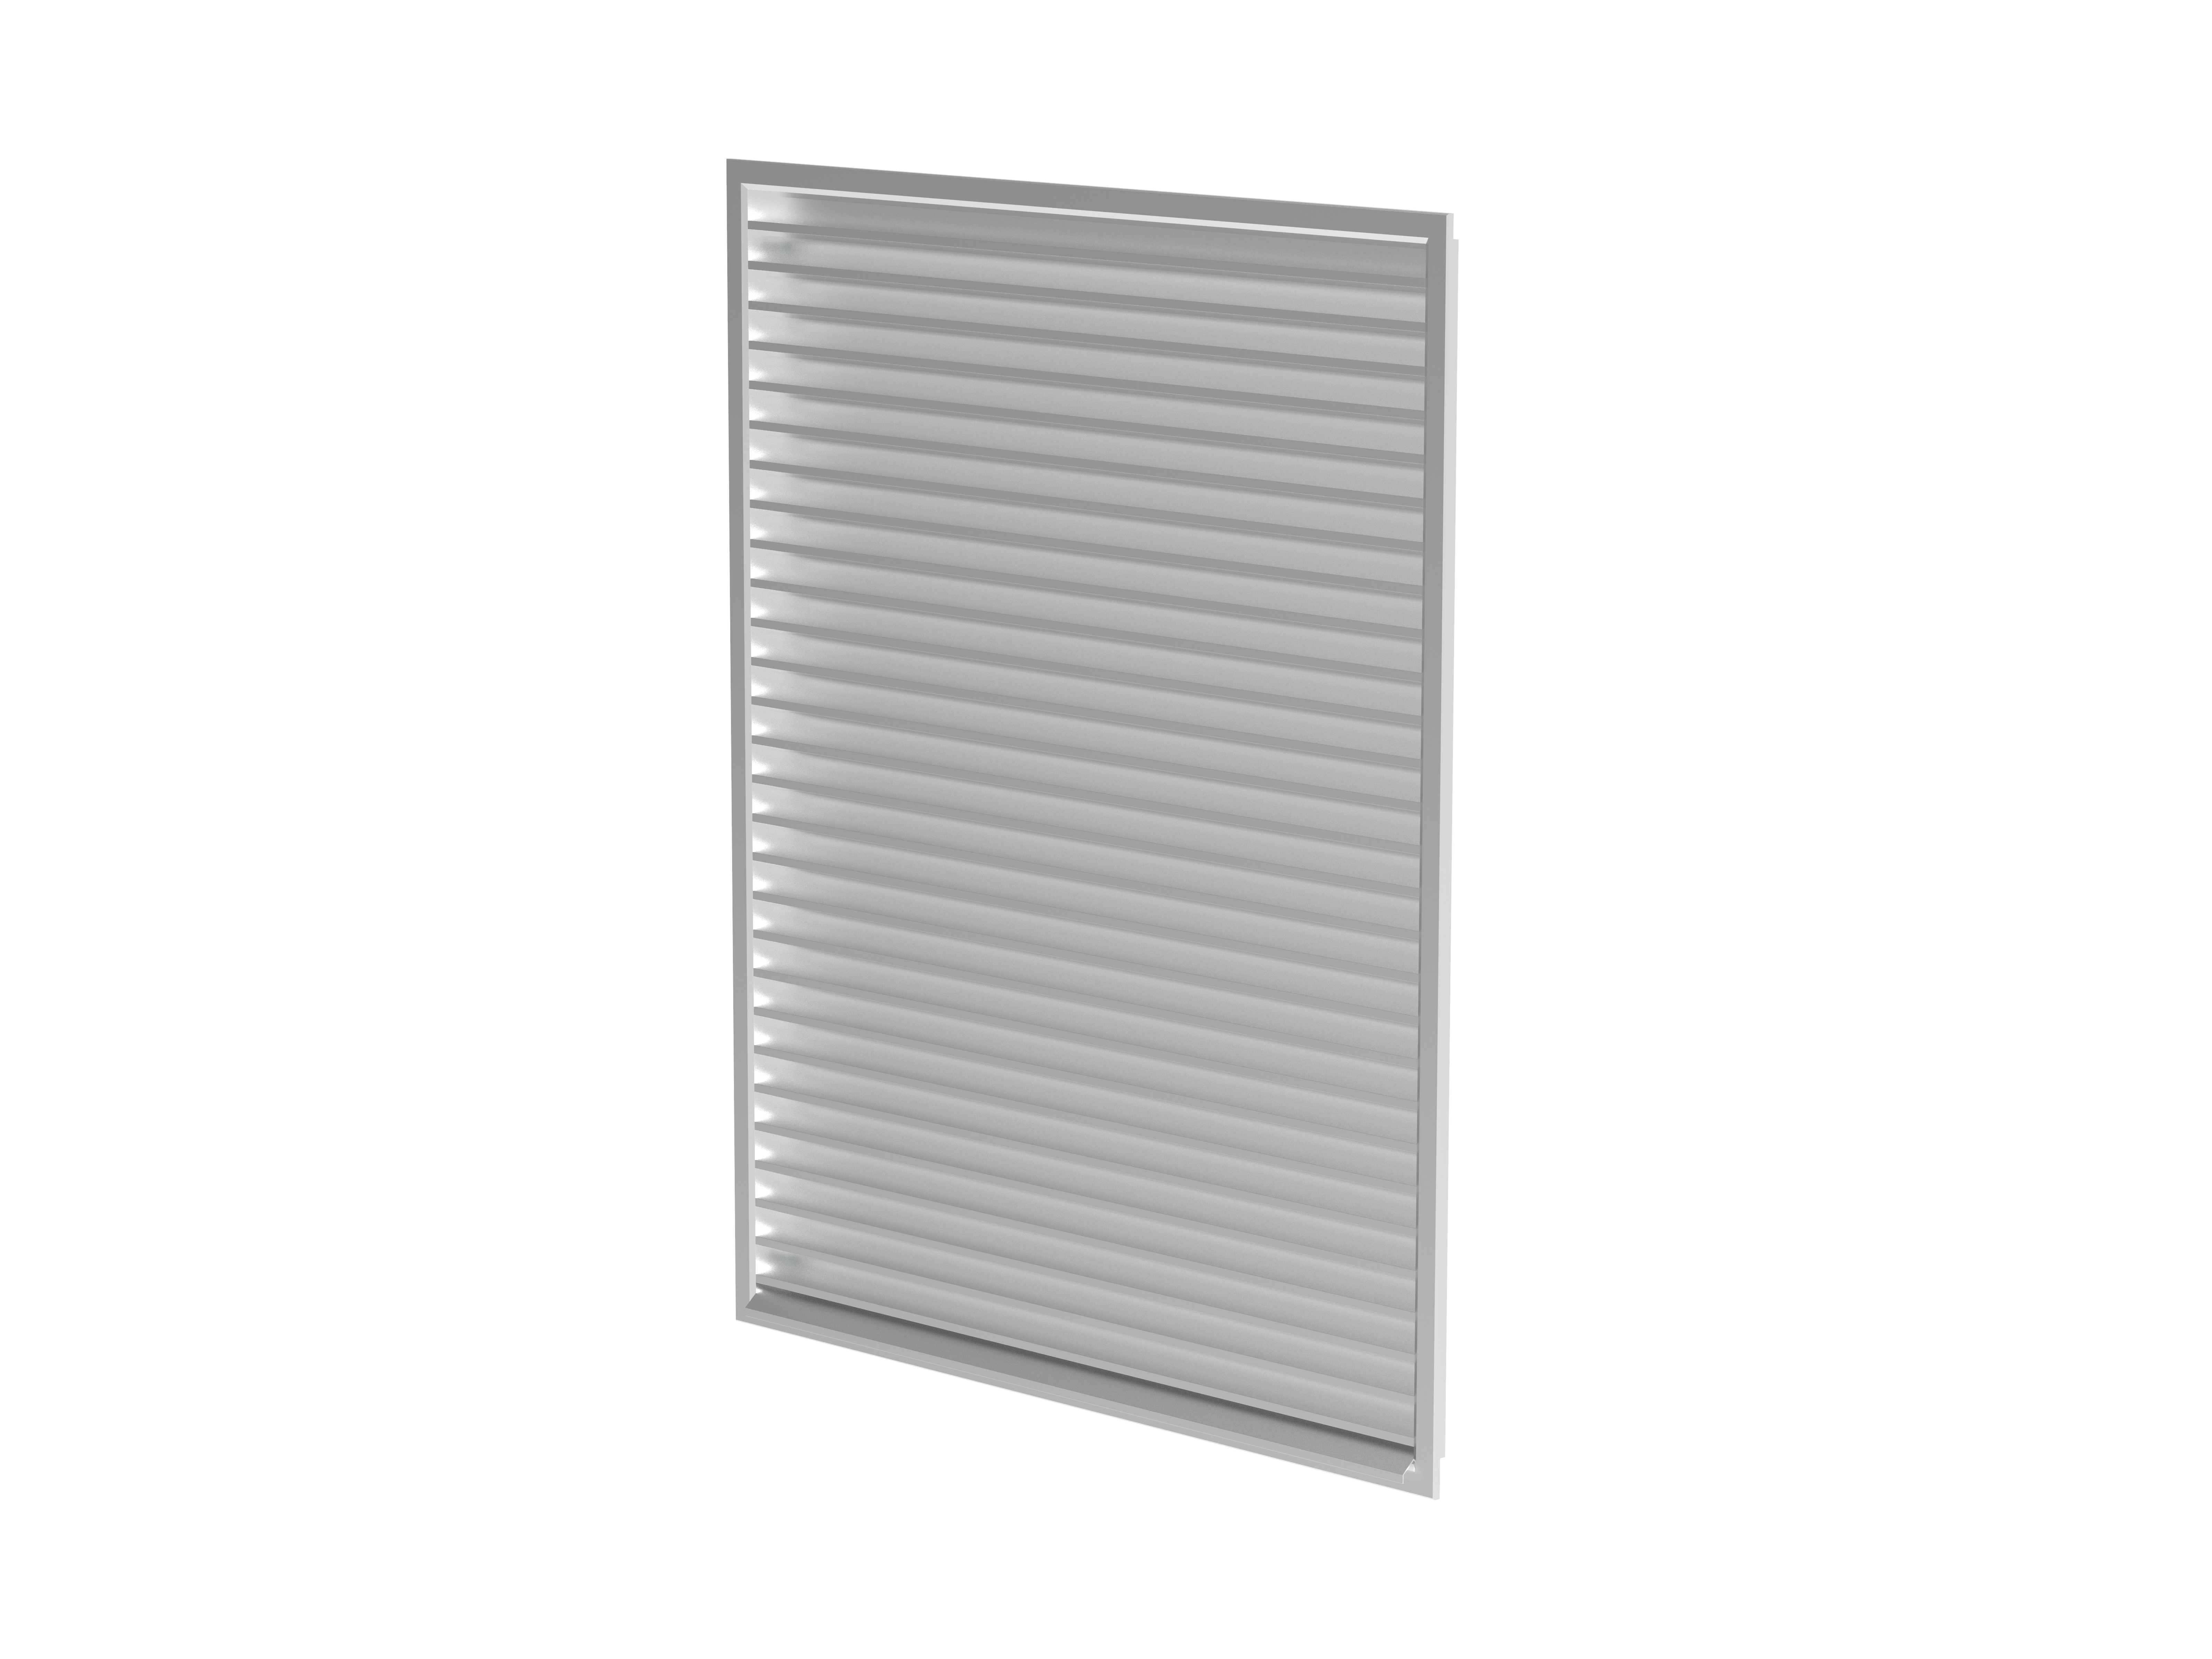 PZAL - Louvres - Air Distribution Products - Products - Systemair